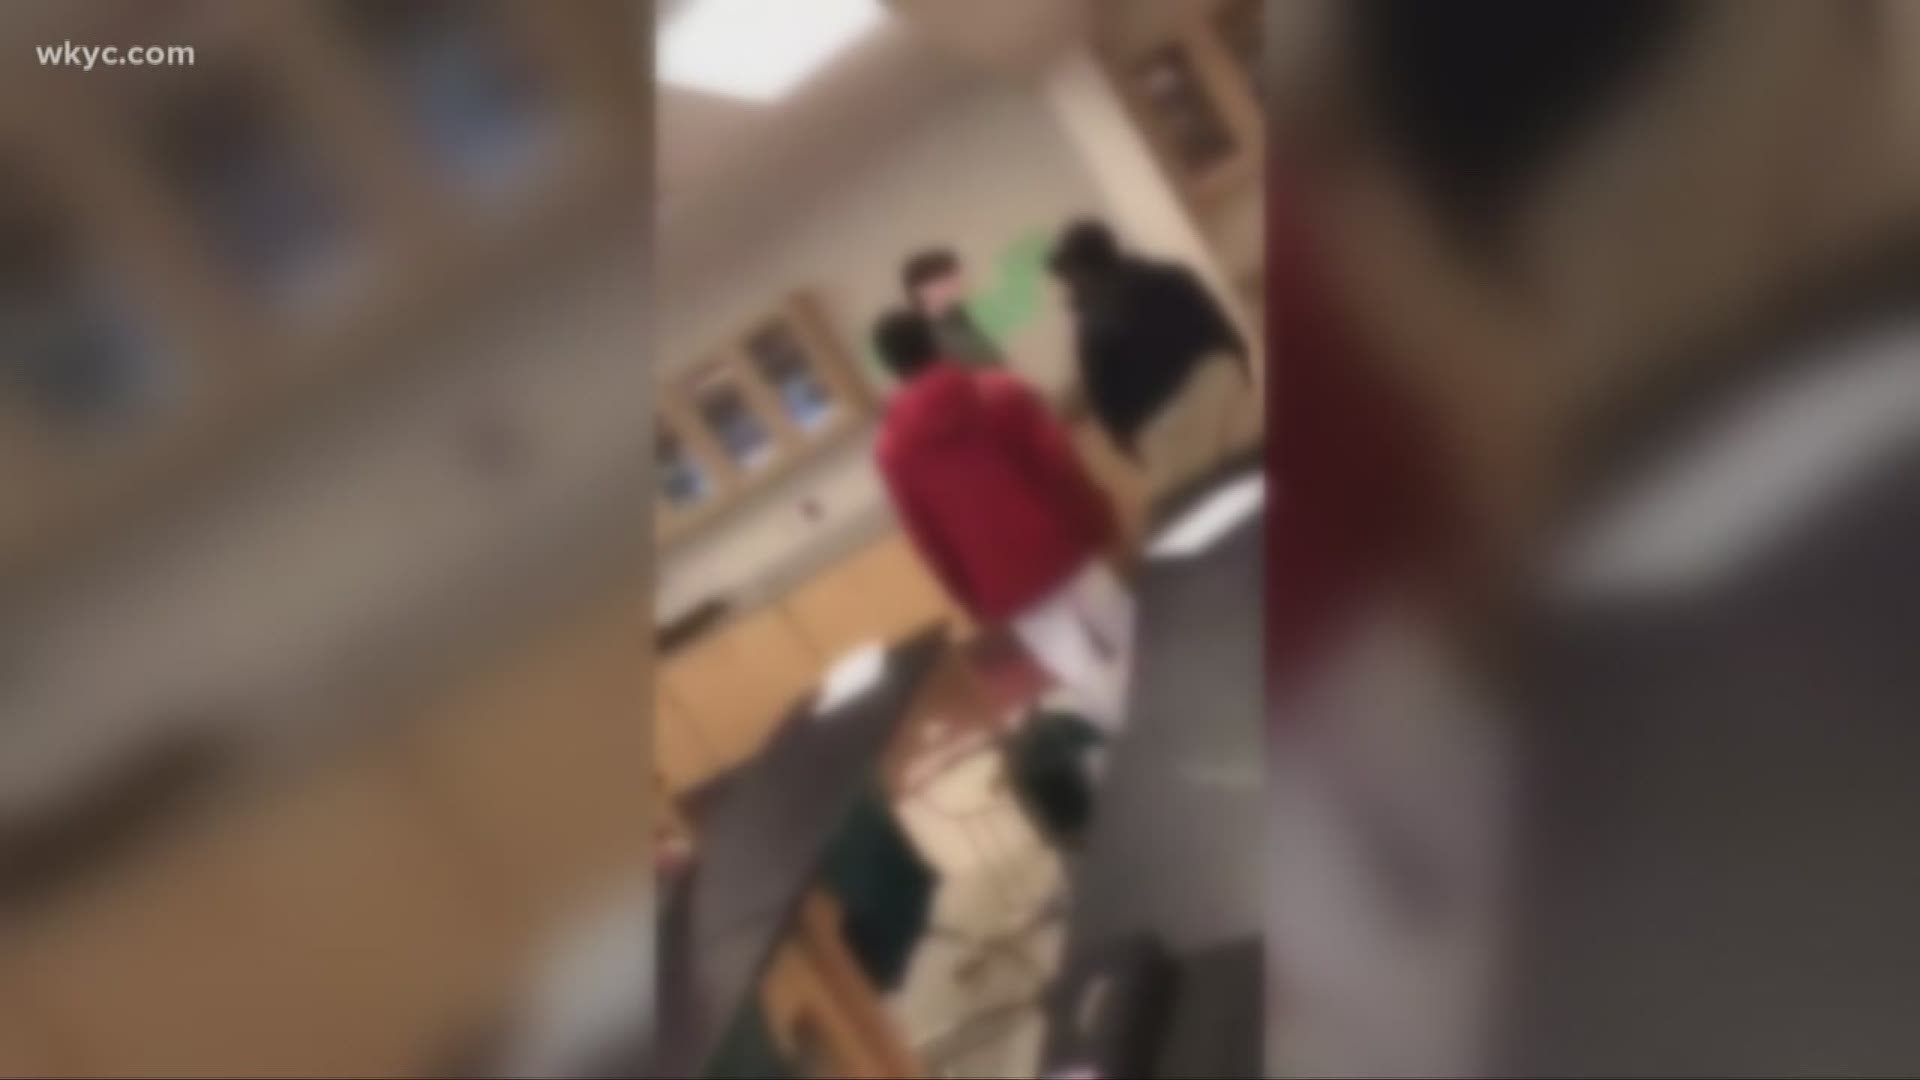 A woman wrote on social media that 'two teachers in the room do nothing to try to defuse this before my son gets stomped on by four boys.' Amani Abraham reports.